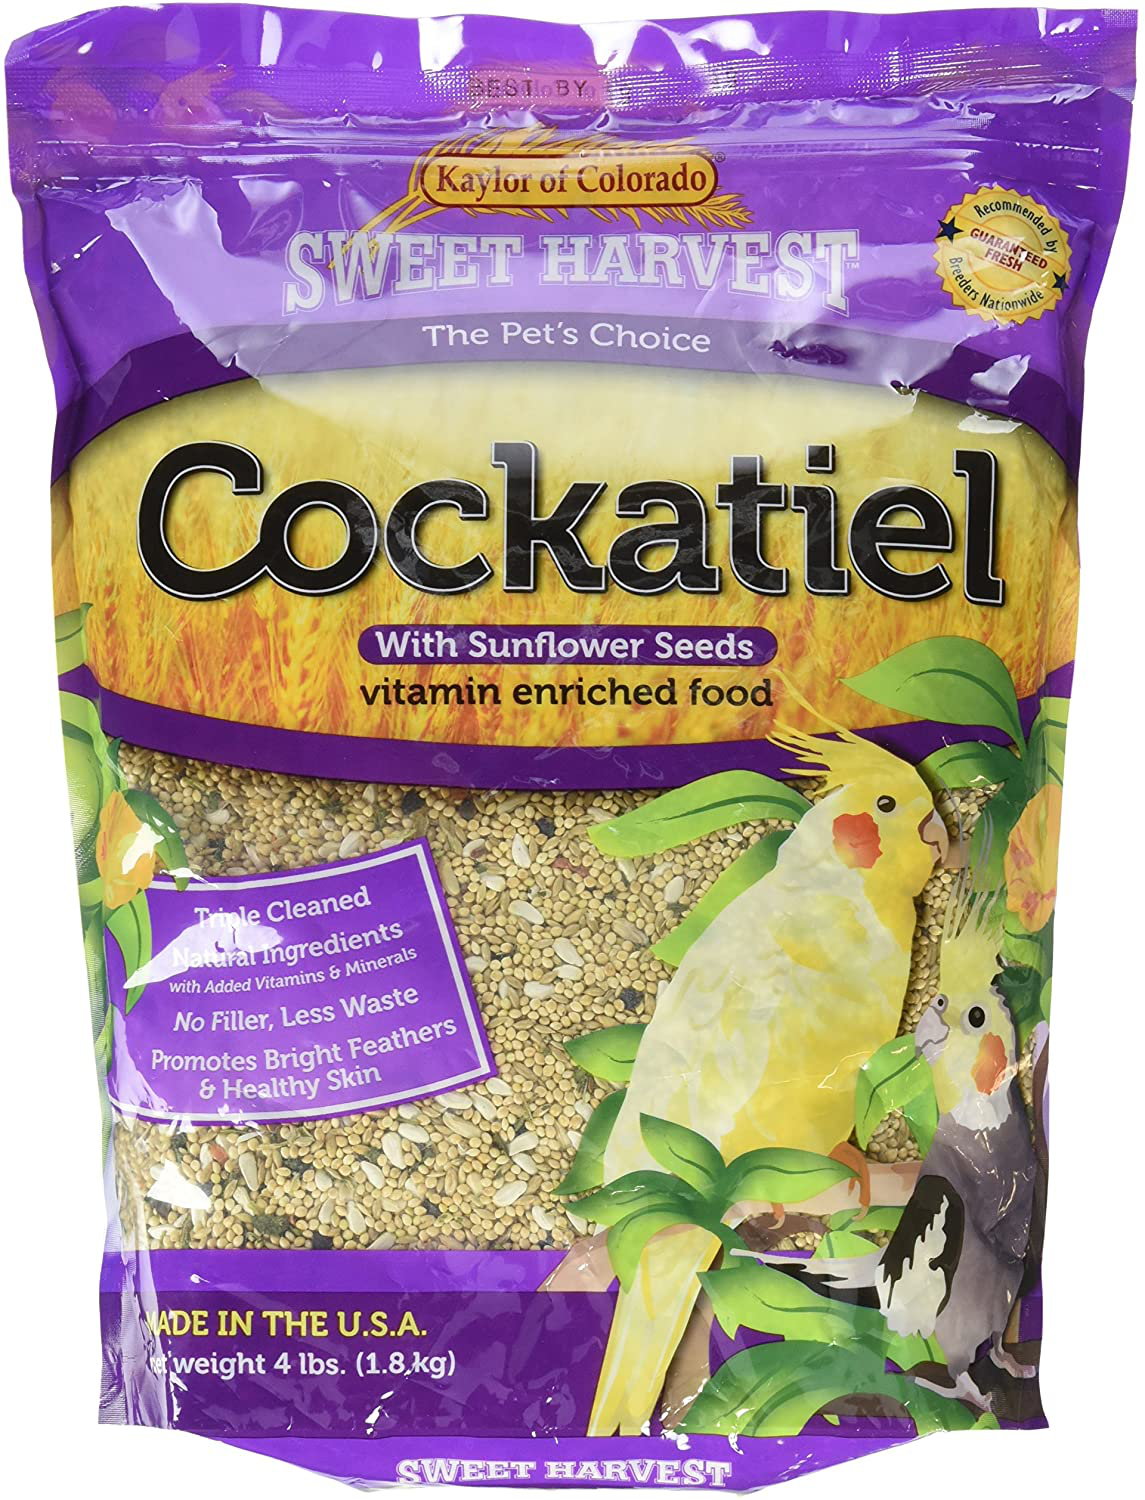 Sweet Harvest Cockatiel Bird Food (With Sunflower Seeds), 4 Lbs Bag - Seed Mix for Cockatiels